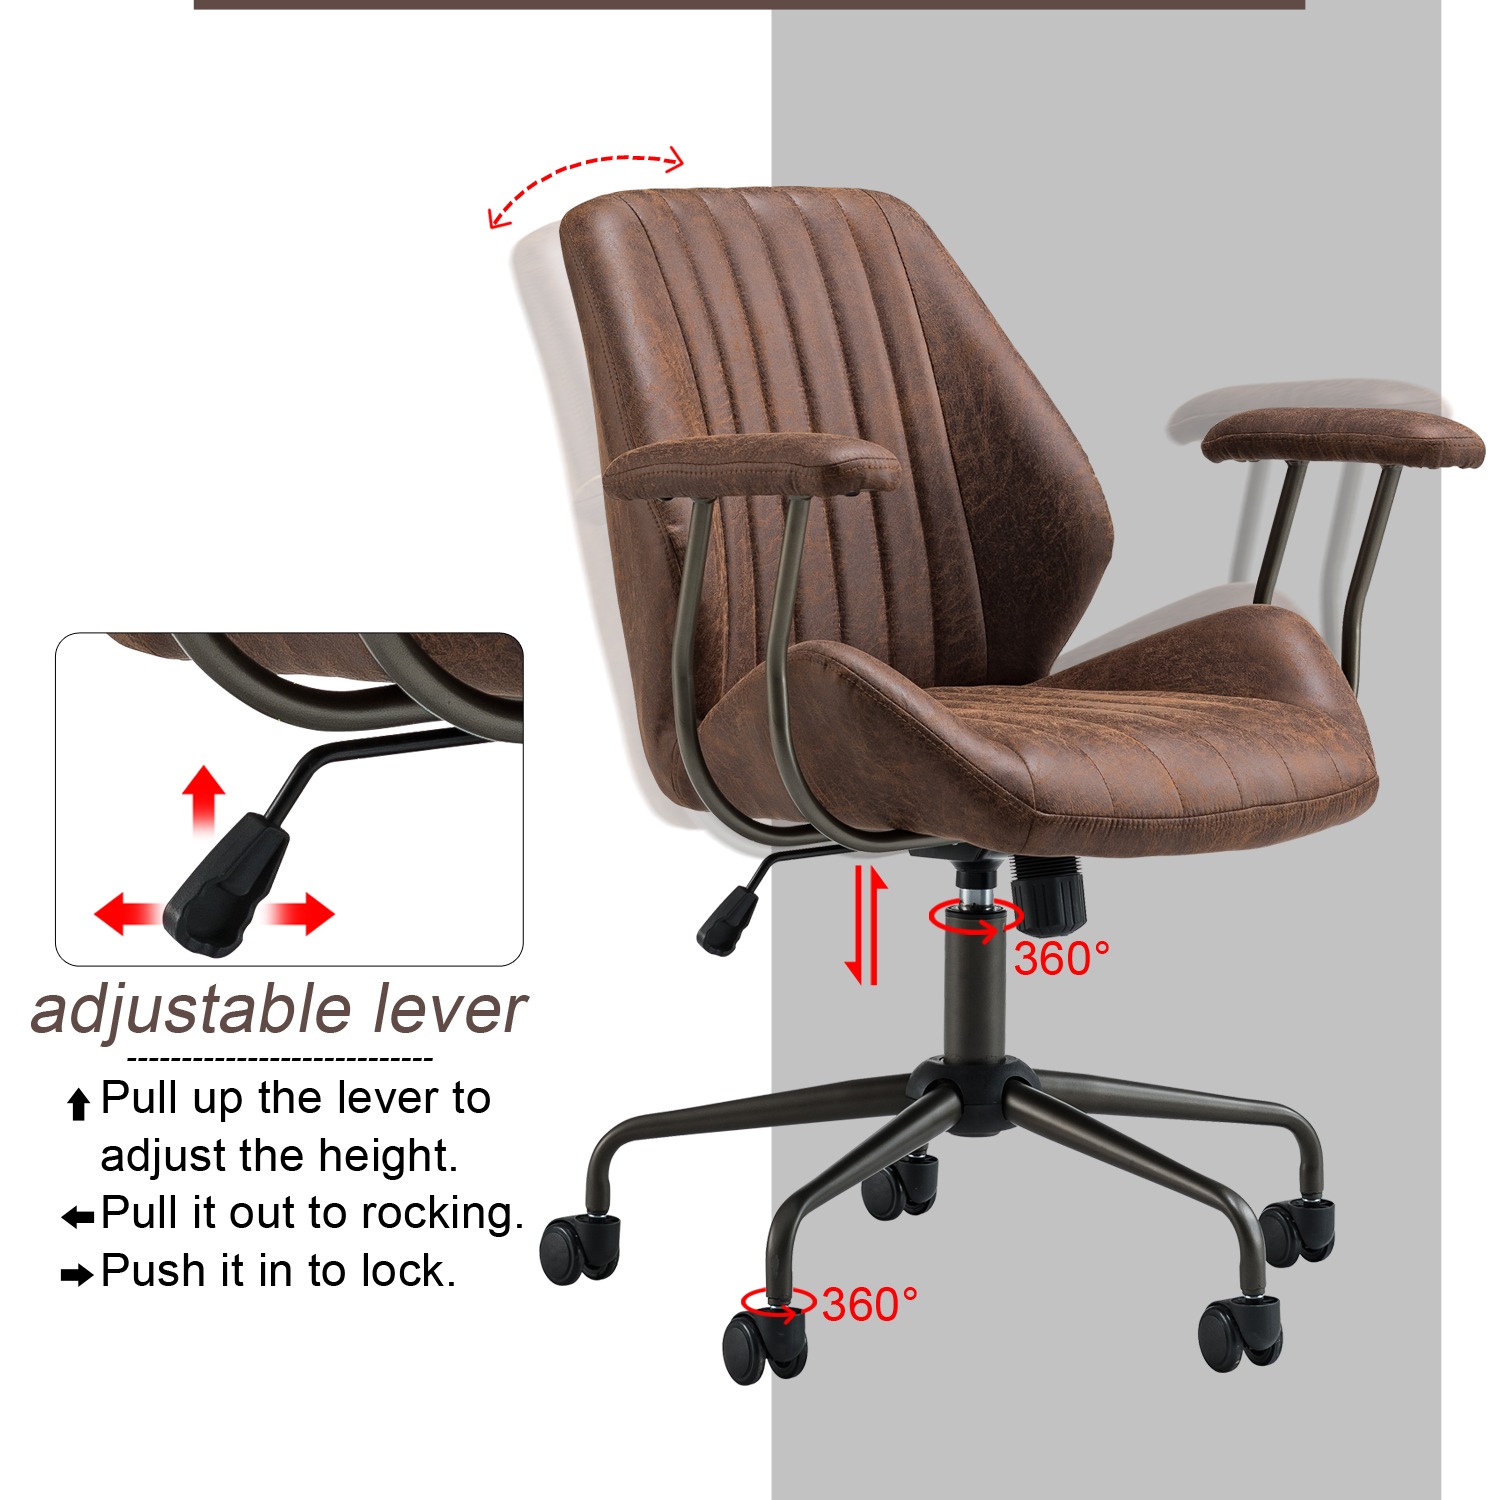 Ovios Ergonomic Office Chair Modern Computer Desk Suede Fabric Desk Chair with Lumbar Support for Home Office - image 5 of 8